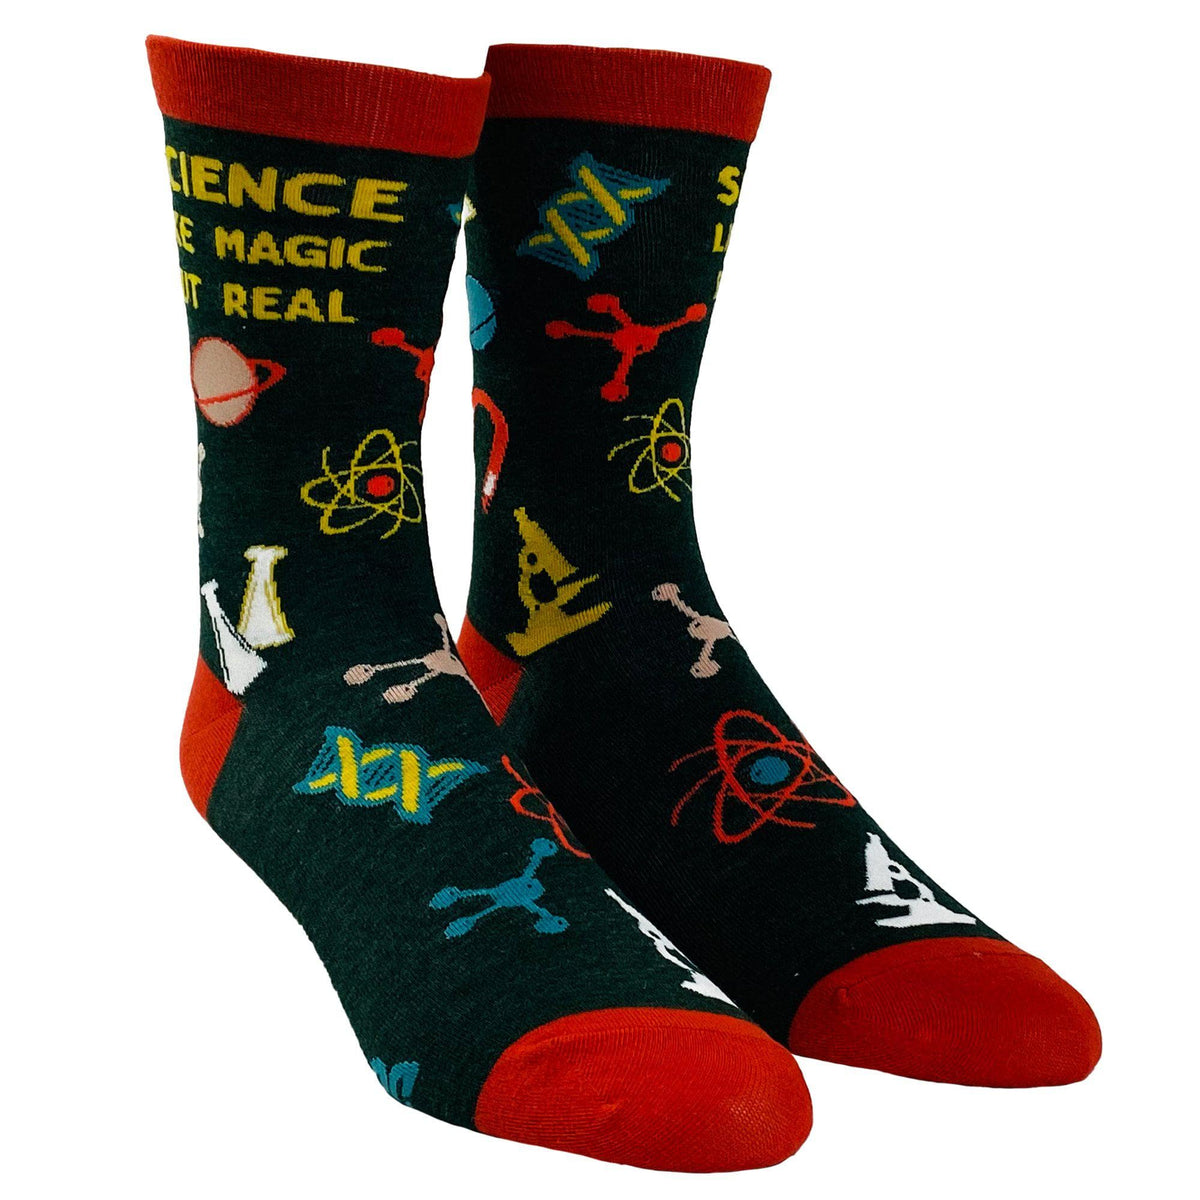 Youth Science Like Magic But Real Socks - Crazy Dog T-Shirts